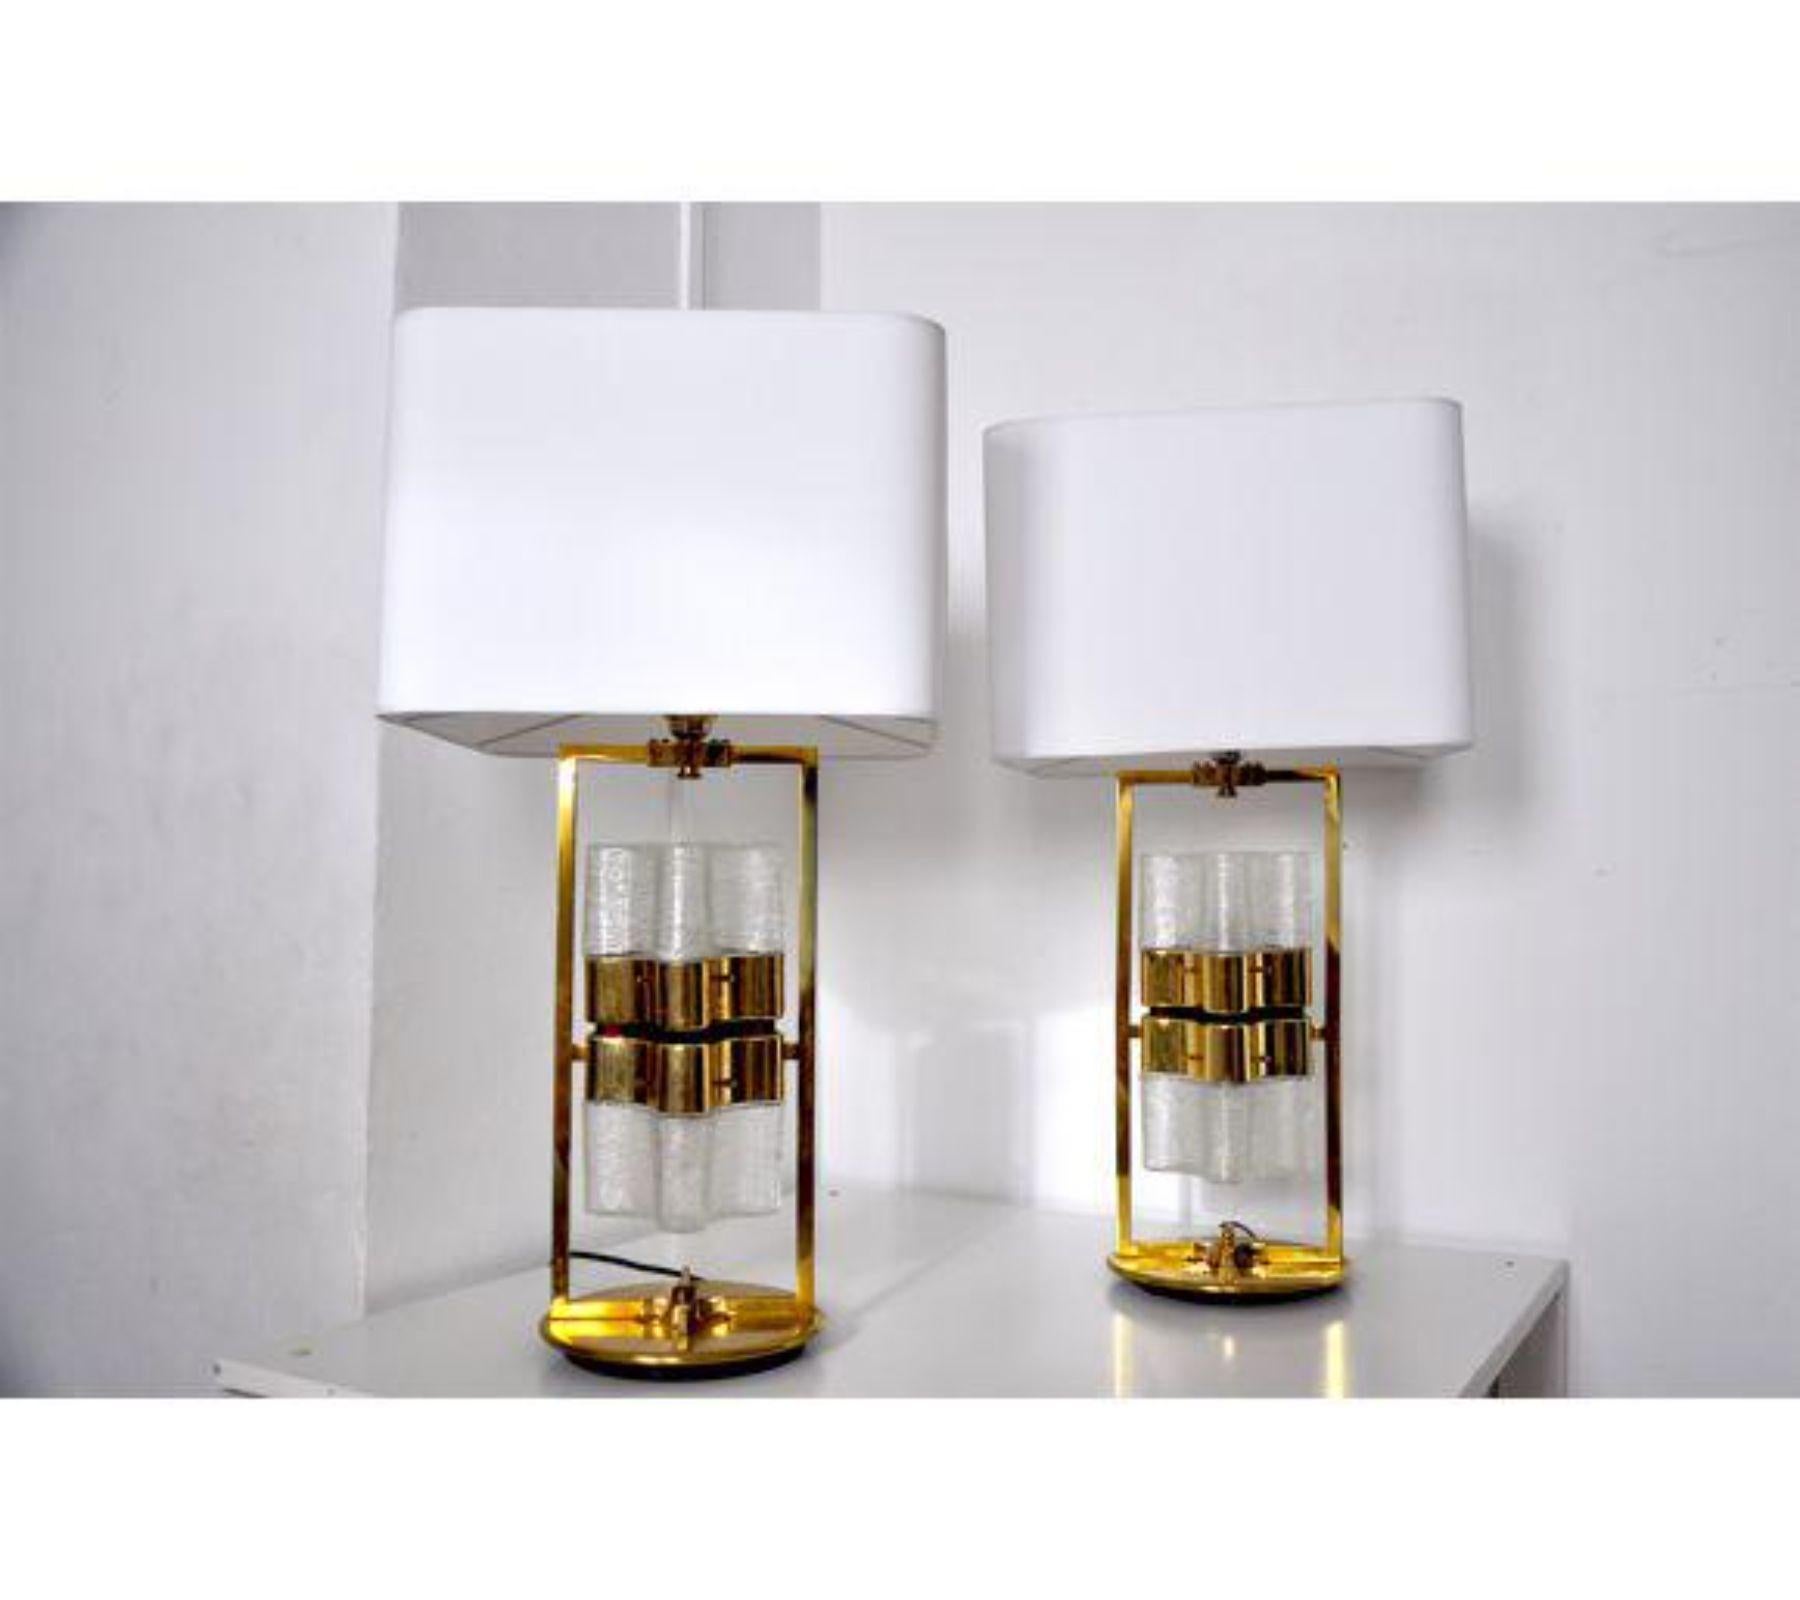 Hollywood Regency 1970 Gateano Sciolari Table Lamps, Italy - a Pair For Sale